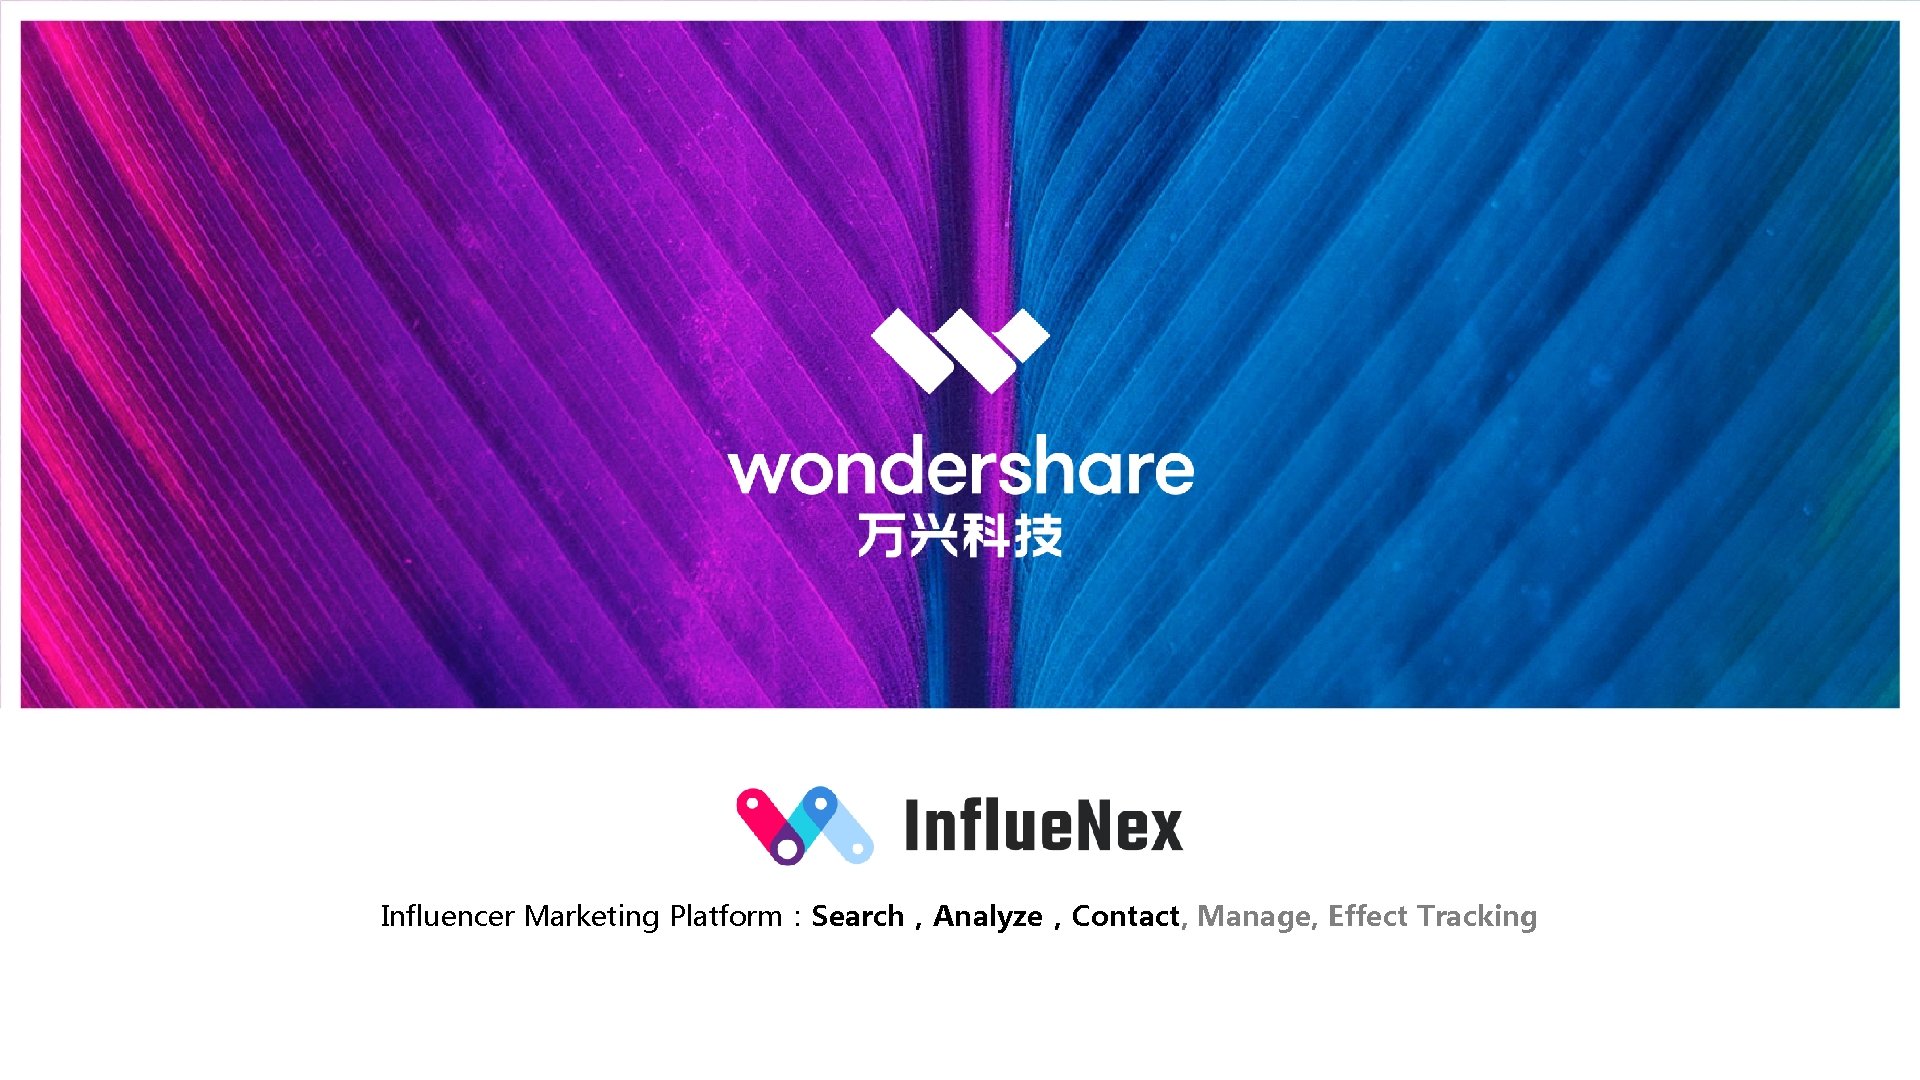 Influencer Marketing Platform：Search，Analyze，Contact, Manage, Effect Tracking 